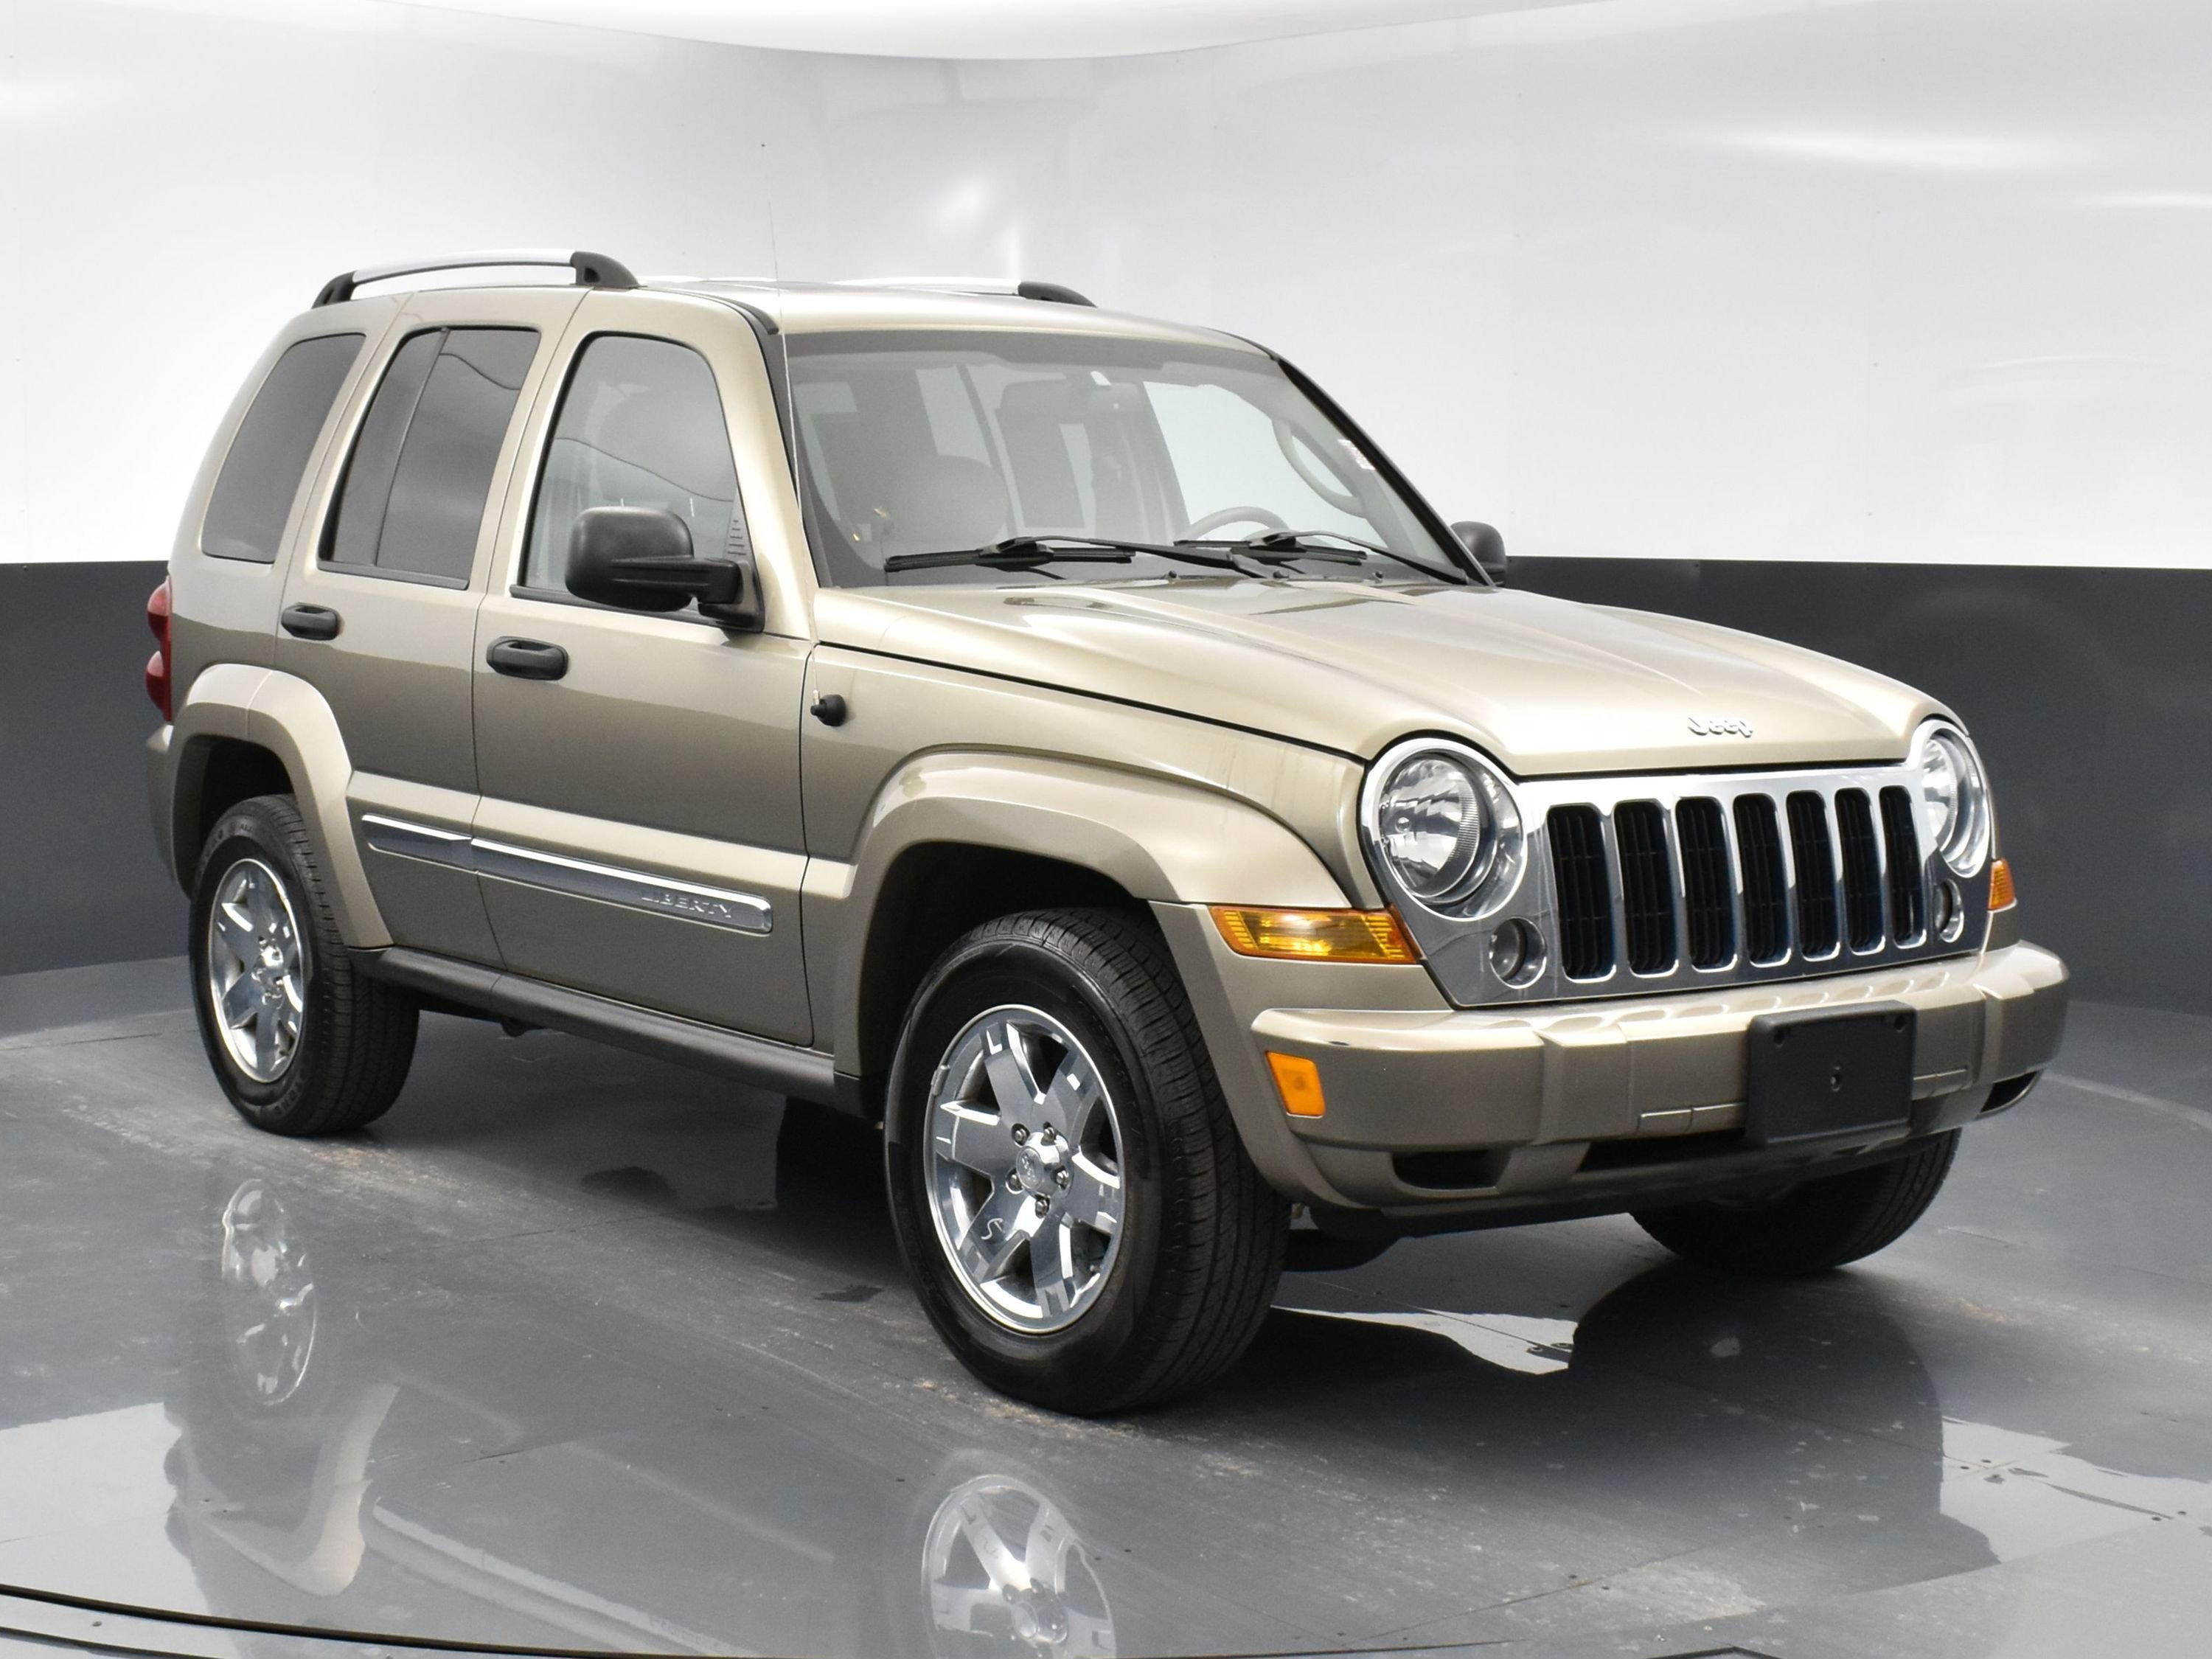 Pre-Owned 2007 Jeep Liberty Limited SUV in Greensboro #NB0501A | Terry  Labonte Chevrolet